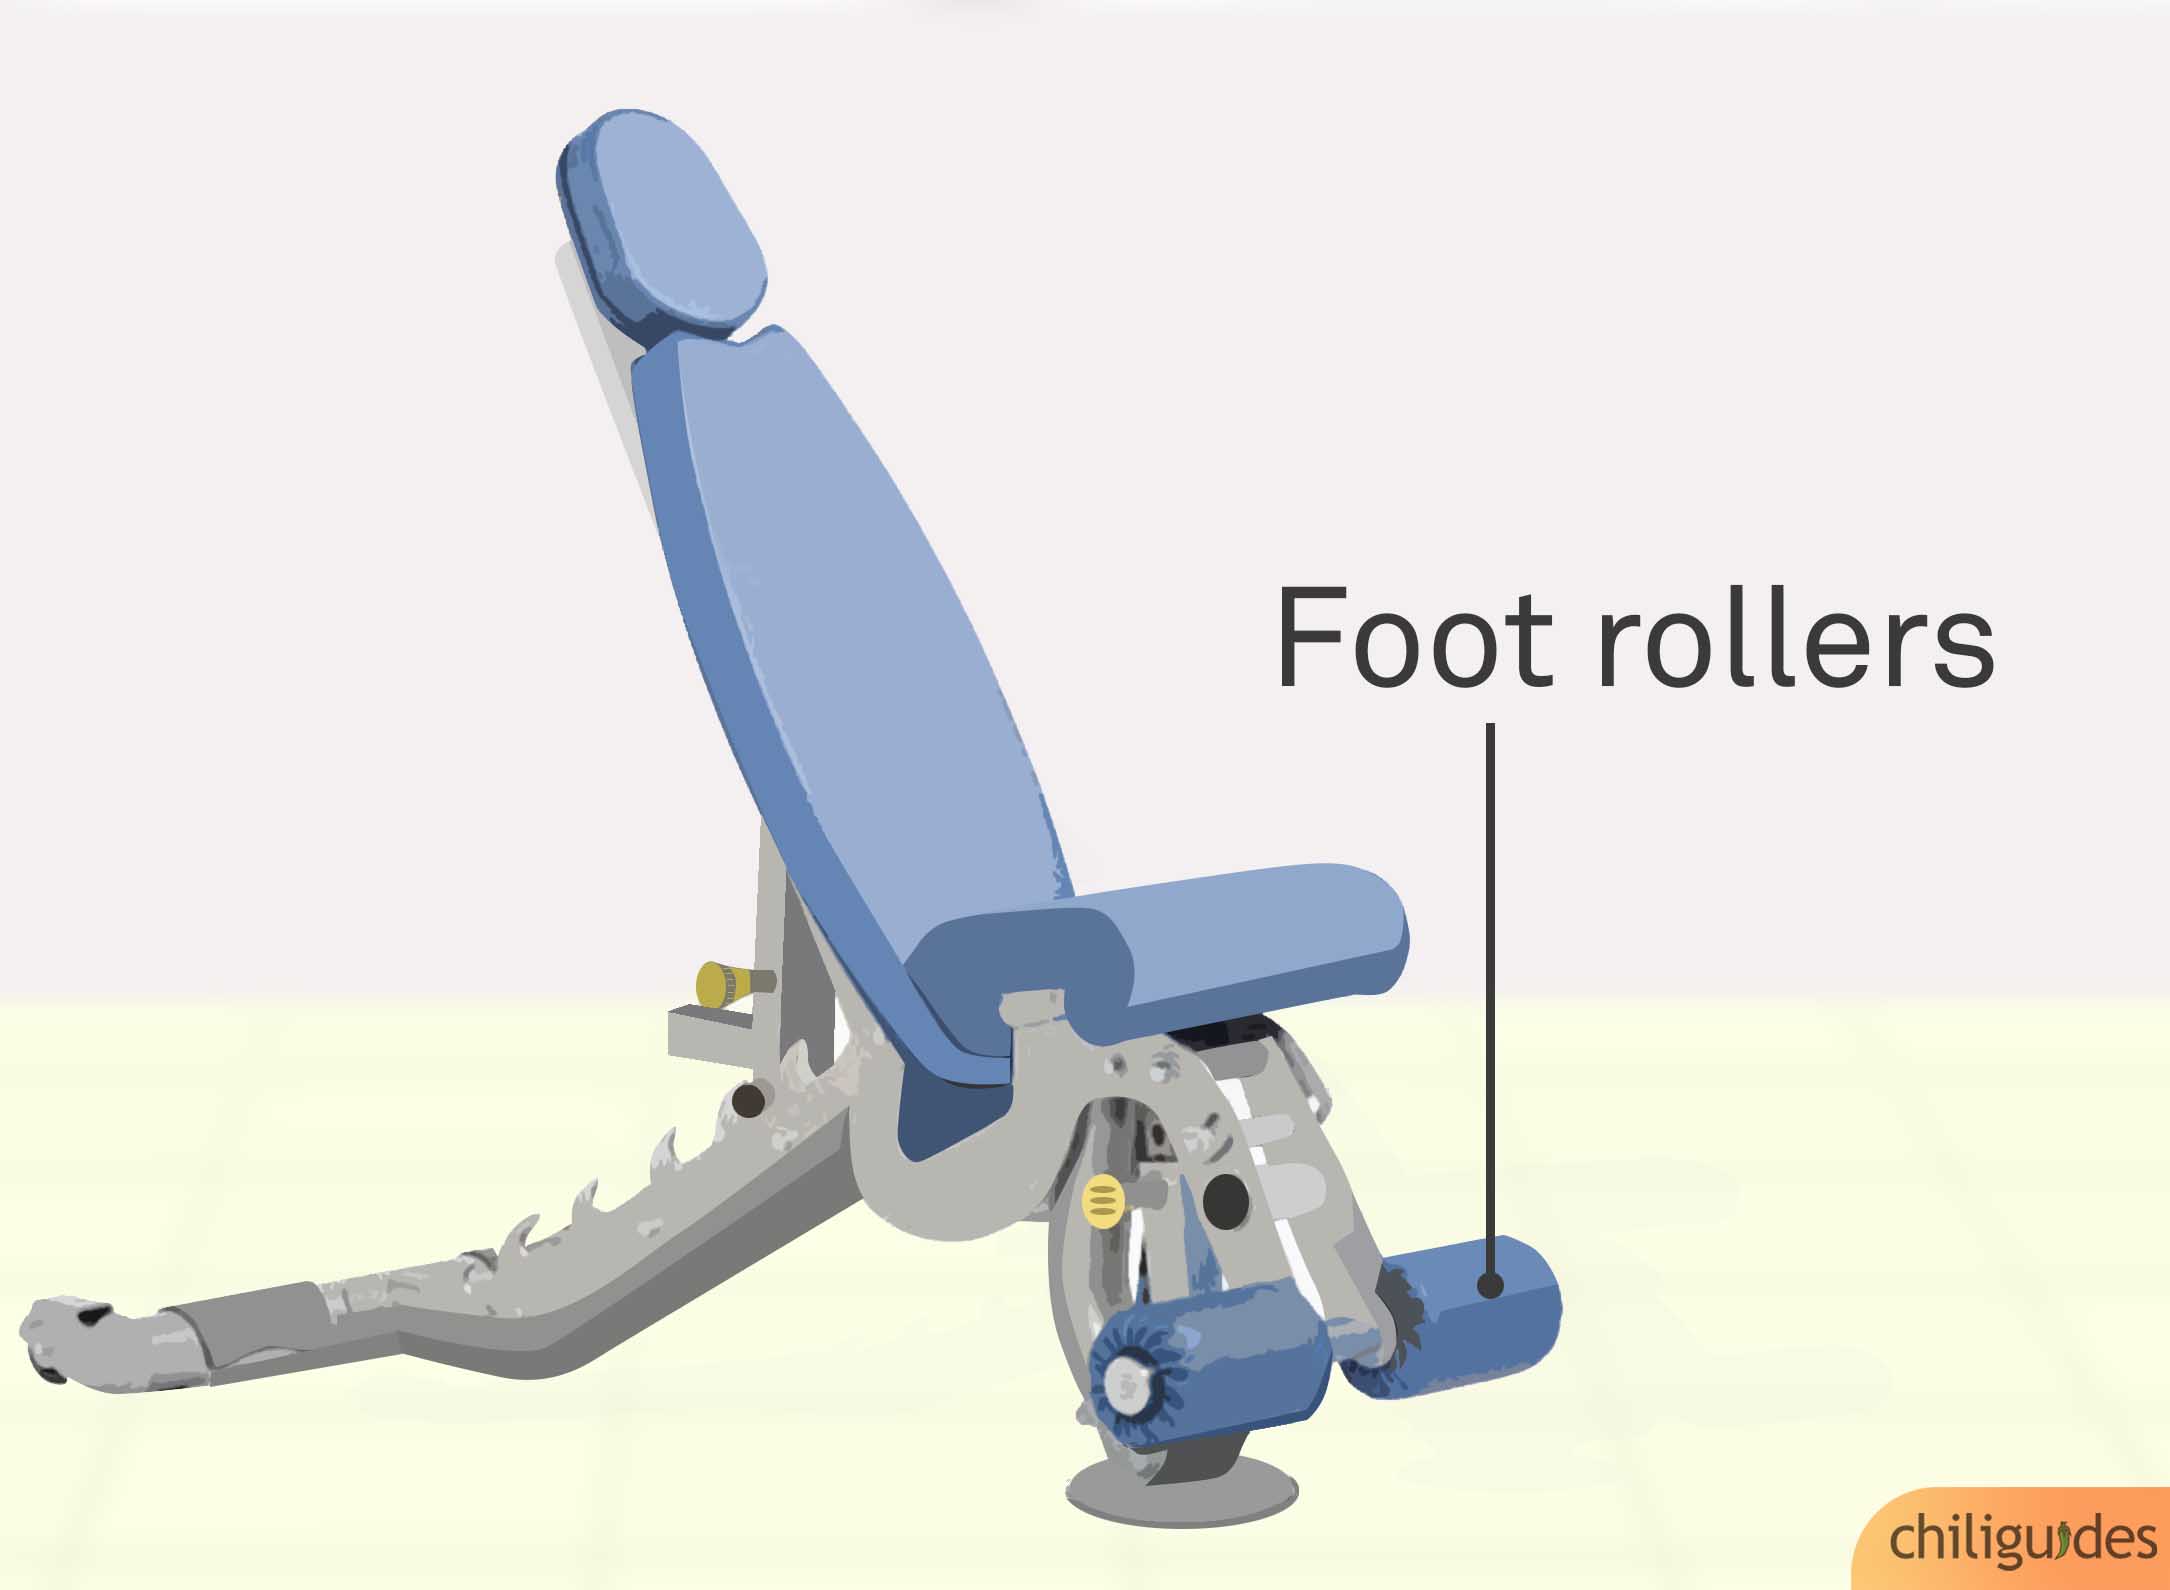 If the bench has foot rollers, they must be removable.